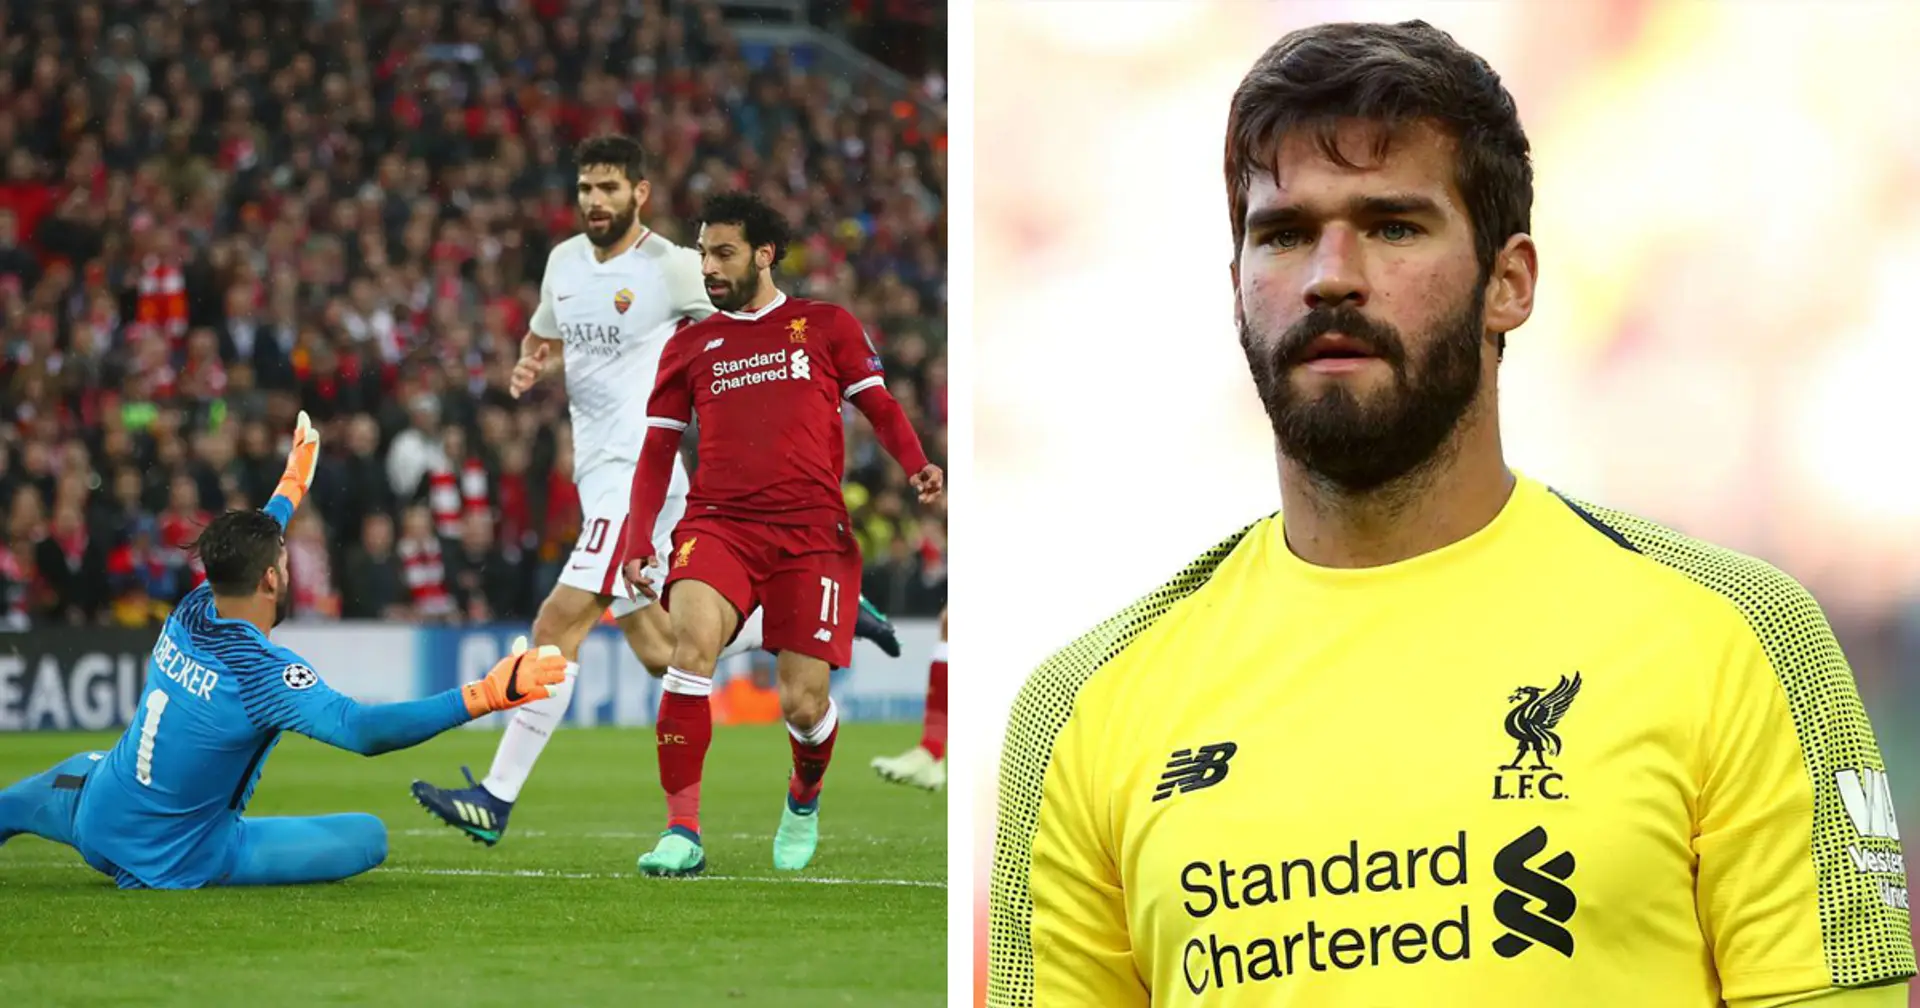 Brazilian goalkeeper Alisson has lost only 1 game at Anfield but not in Liverpool jersey